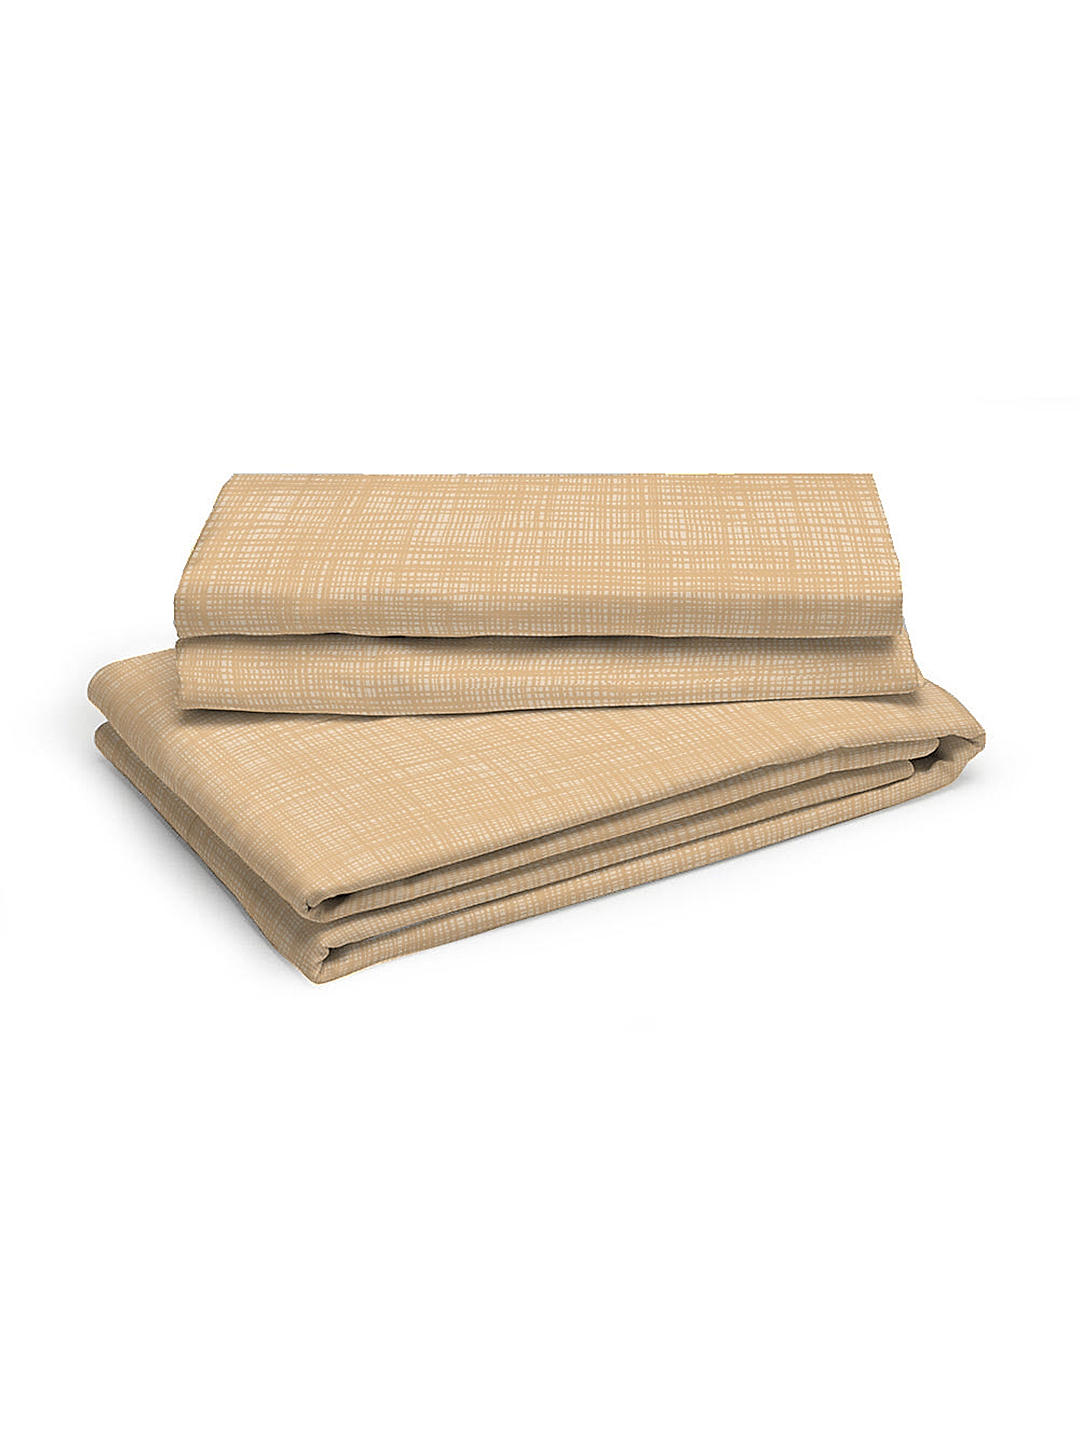 Guaze Cotton Fine Beige Colored Checkered Print King Bed Sheet Set